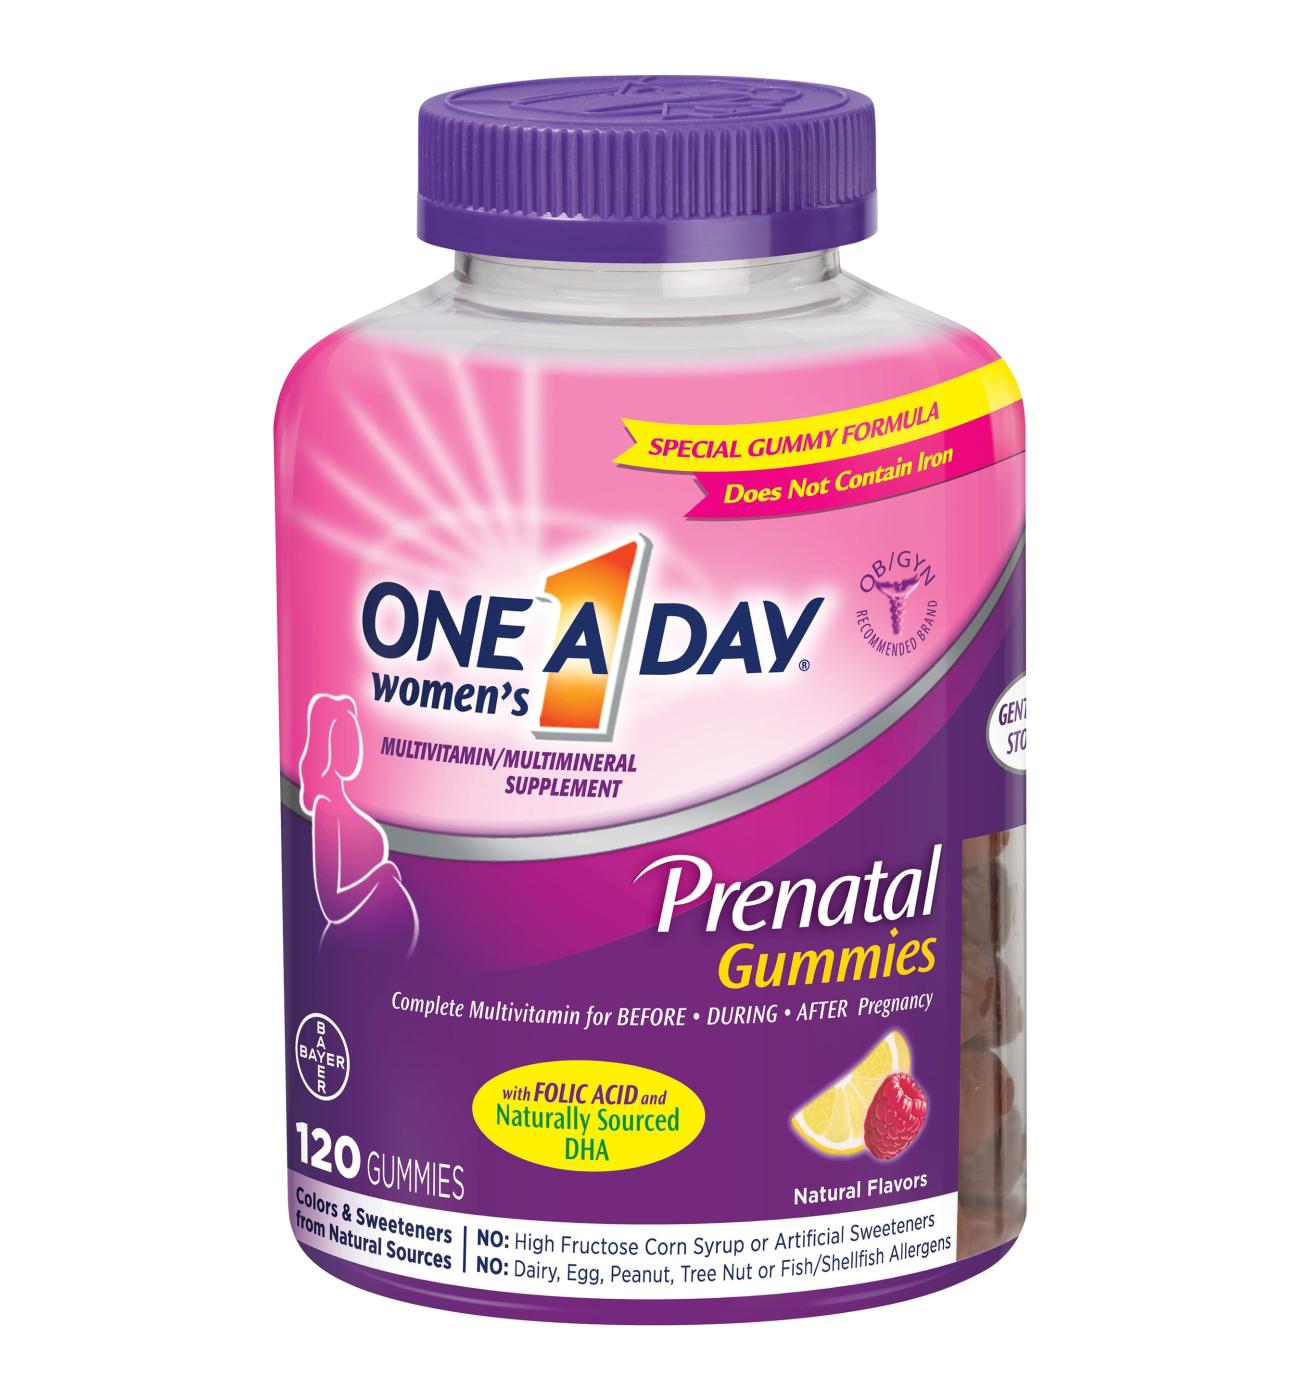 One A Day Womens Prenatal Gummies; image 1 of 6